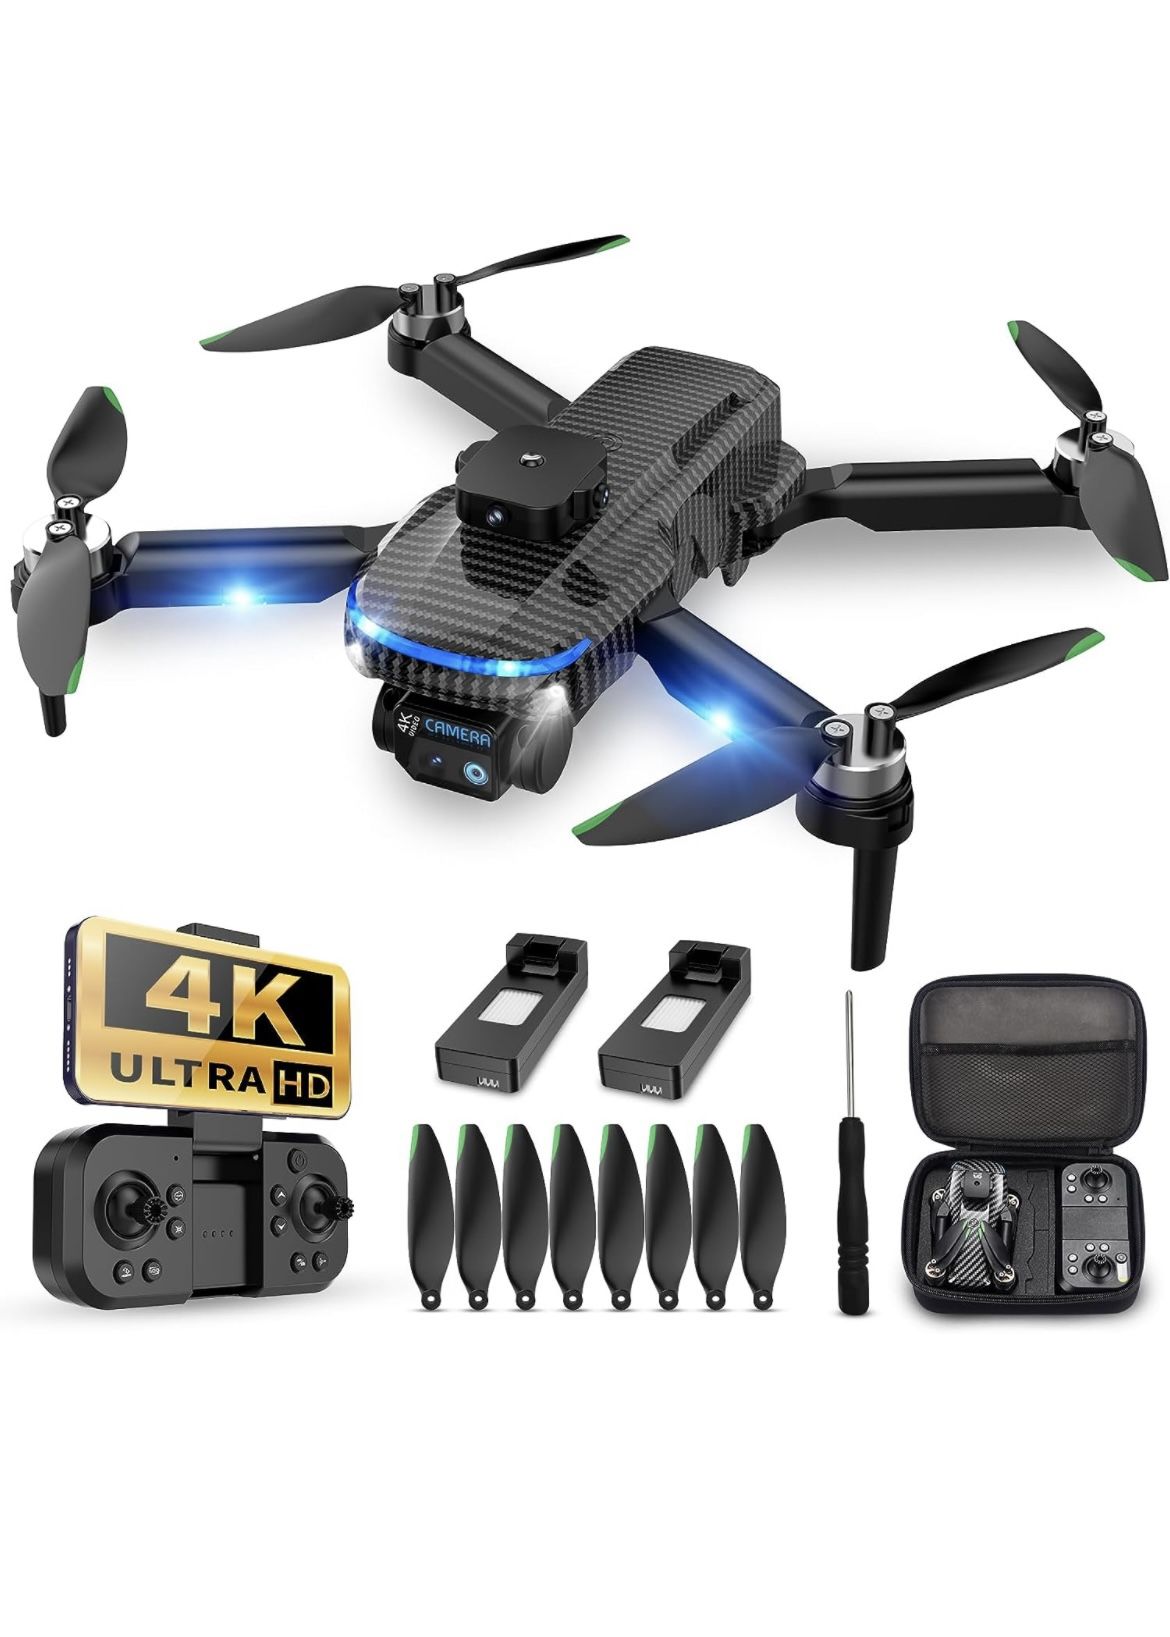 4K FPV Mini Drone, Foldable, Carrying Case 90° Adjustable Lens, One Key Take Off/Land, Brushless Motor, Follow Me,Obstacle Avoidance, Hovering Protect